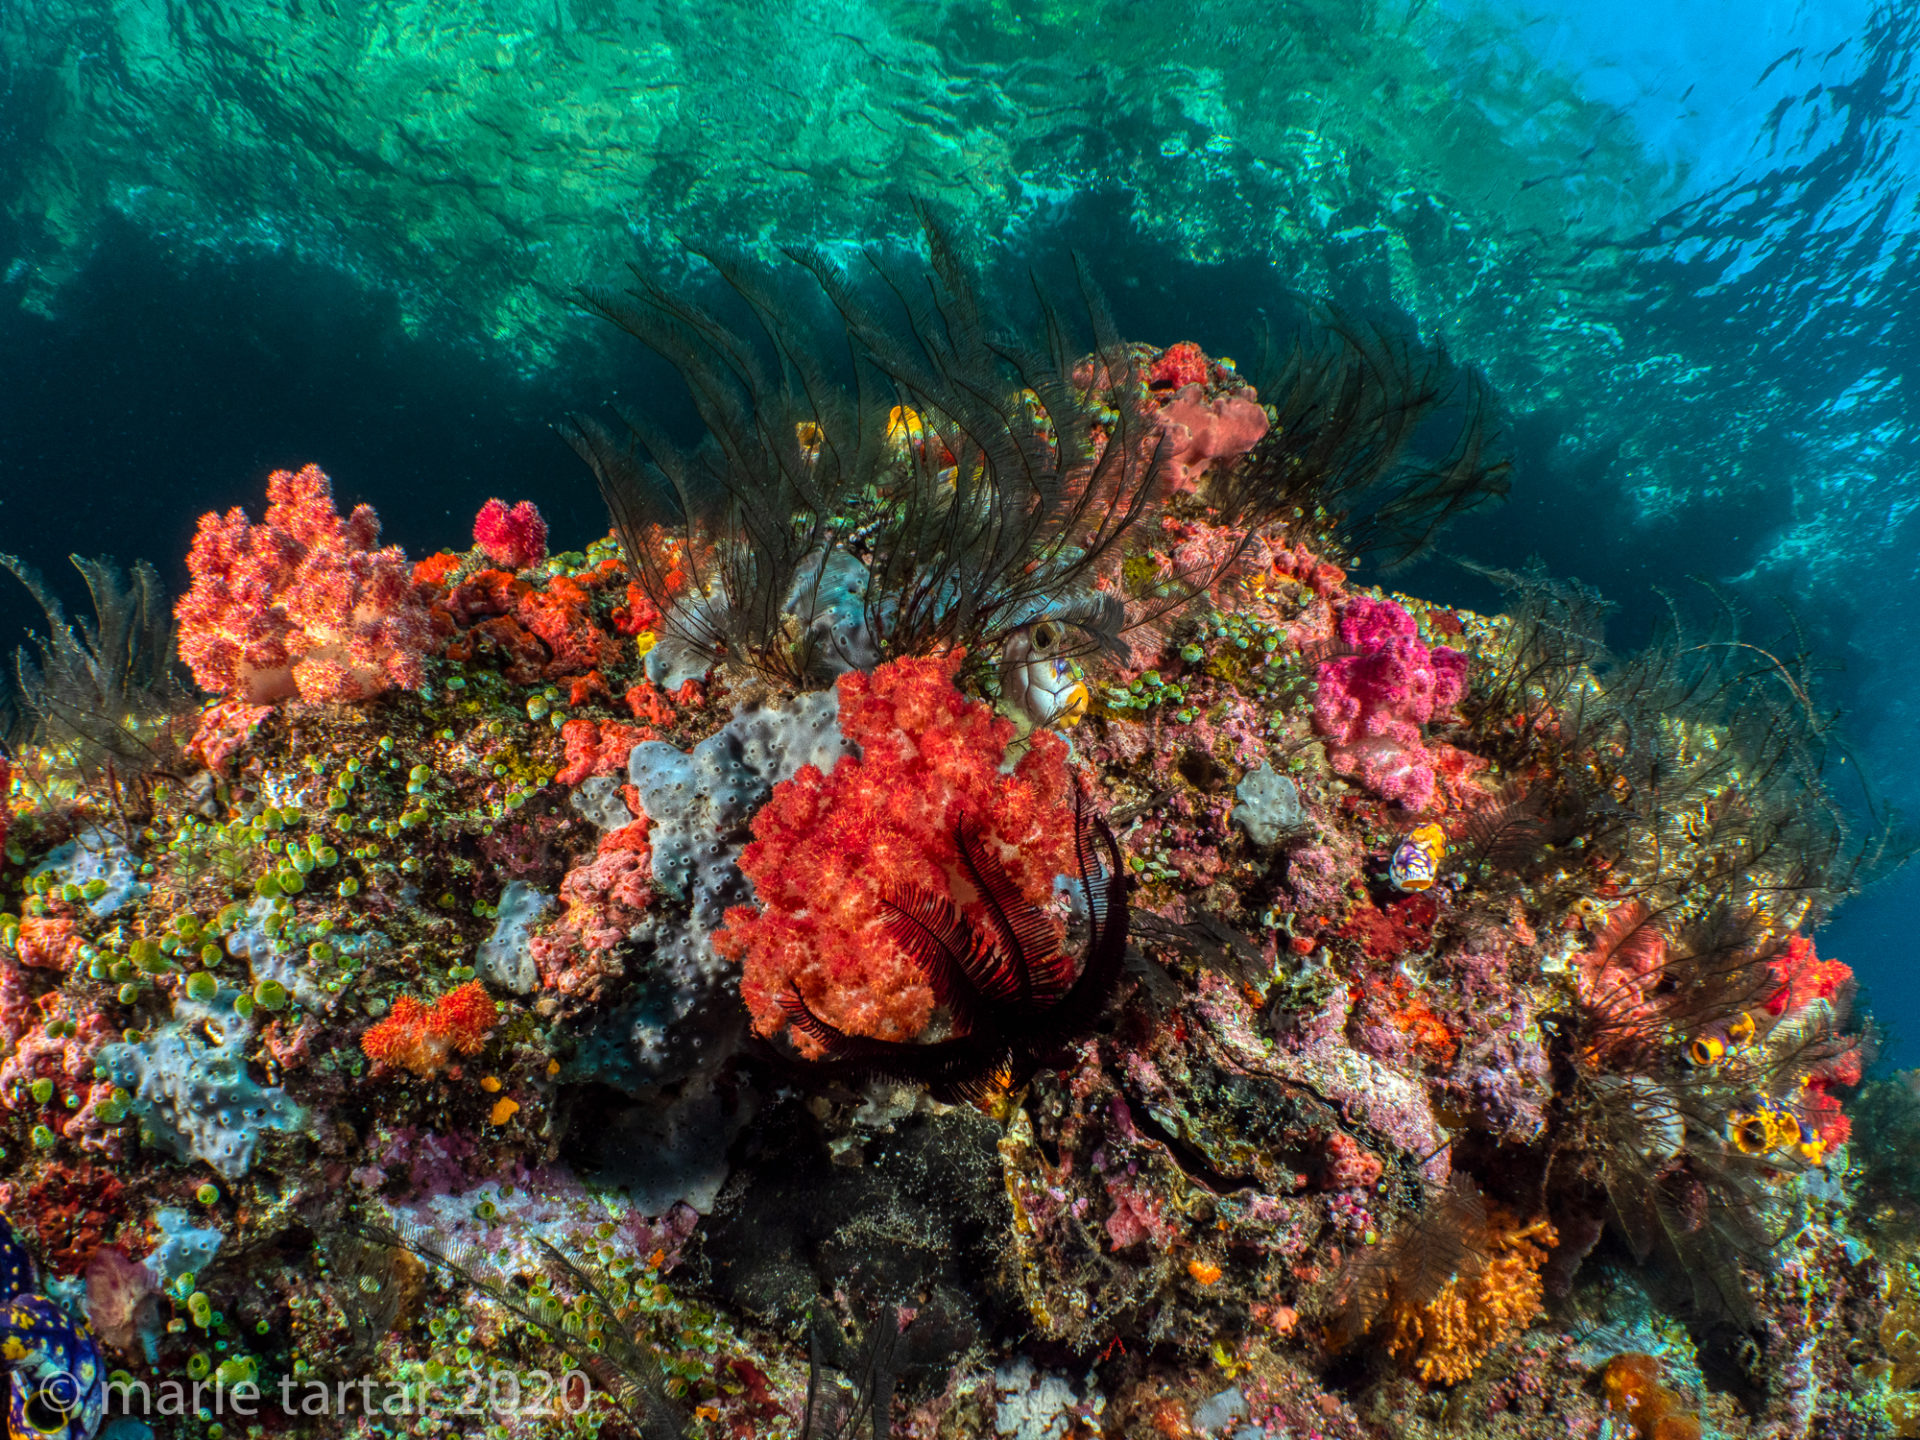 Shallow Raja Ampat coral reef scene with island seen on surface.